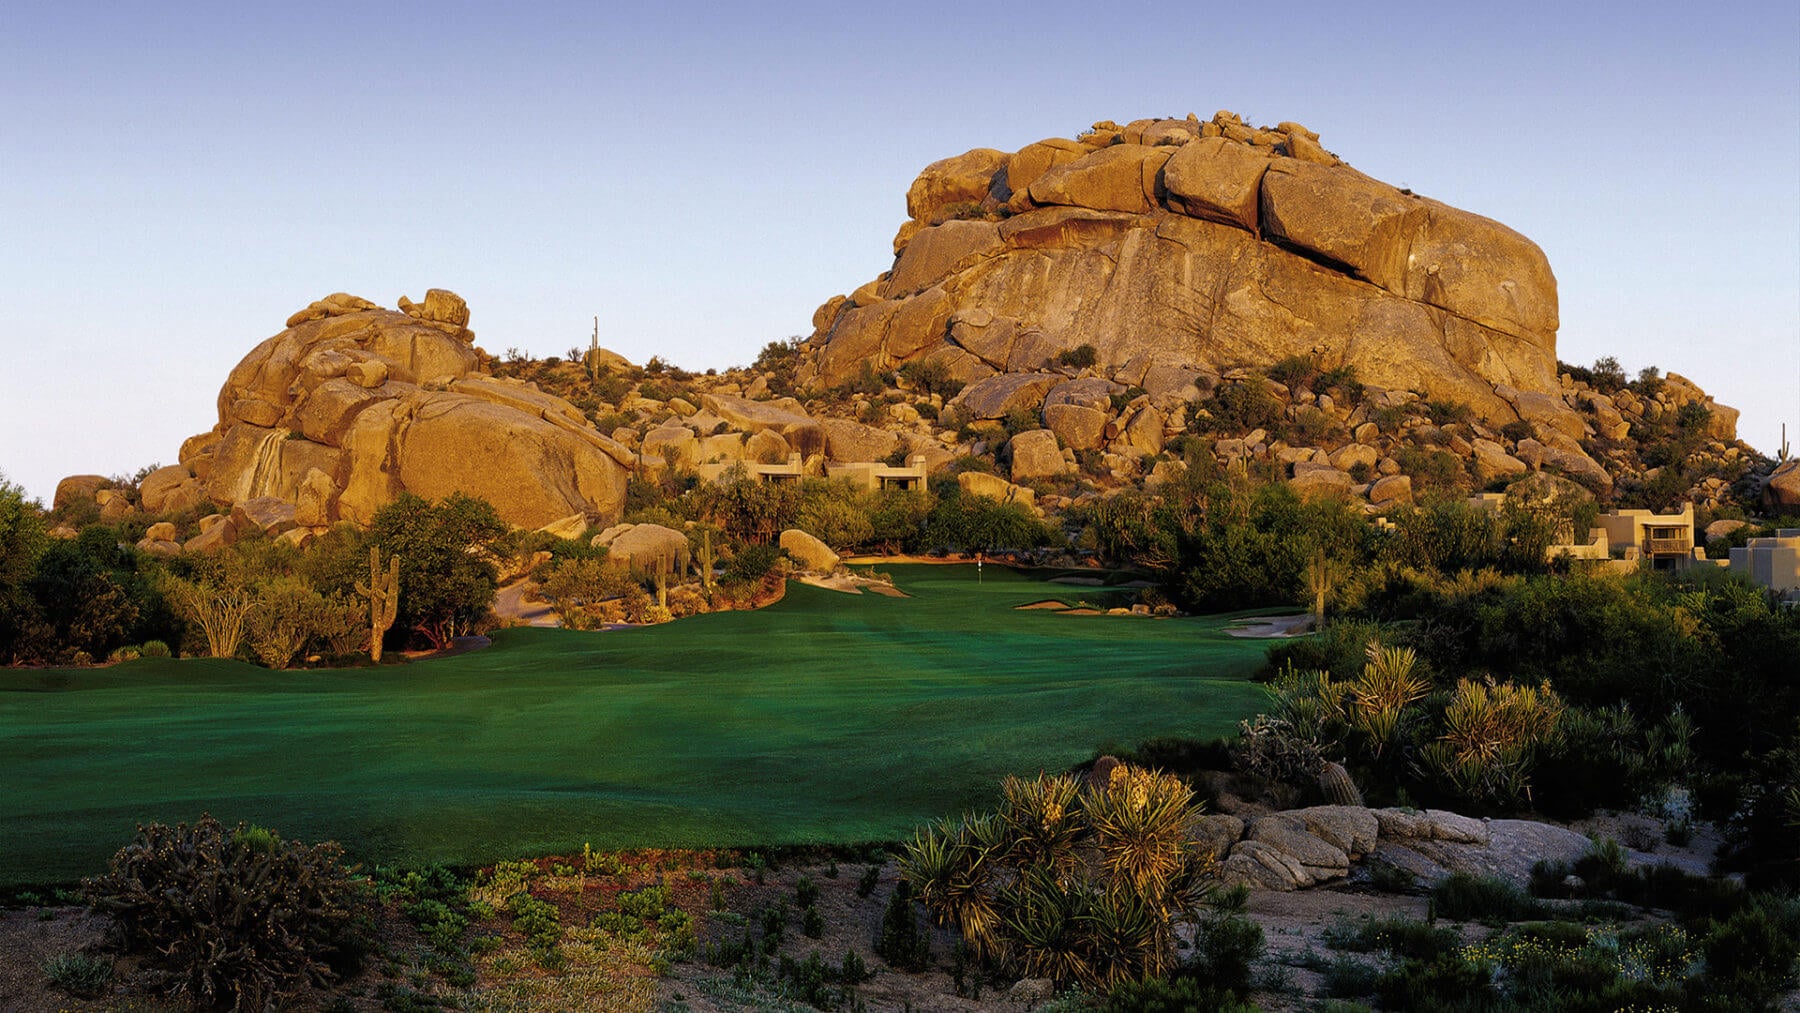 Large rock formations overshadow the South Course